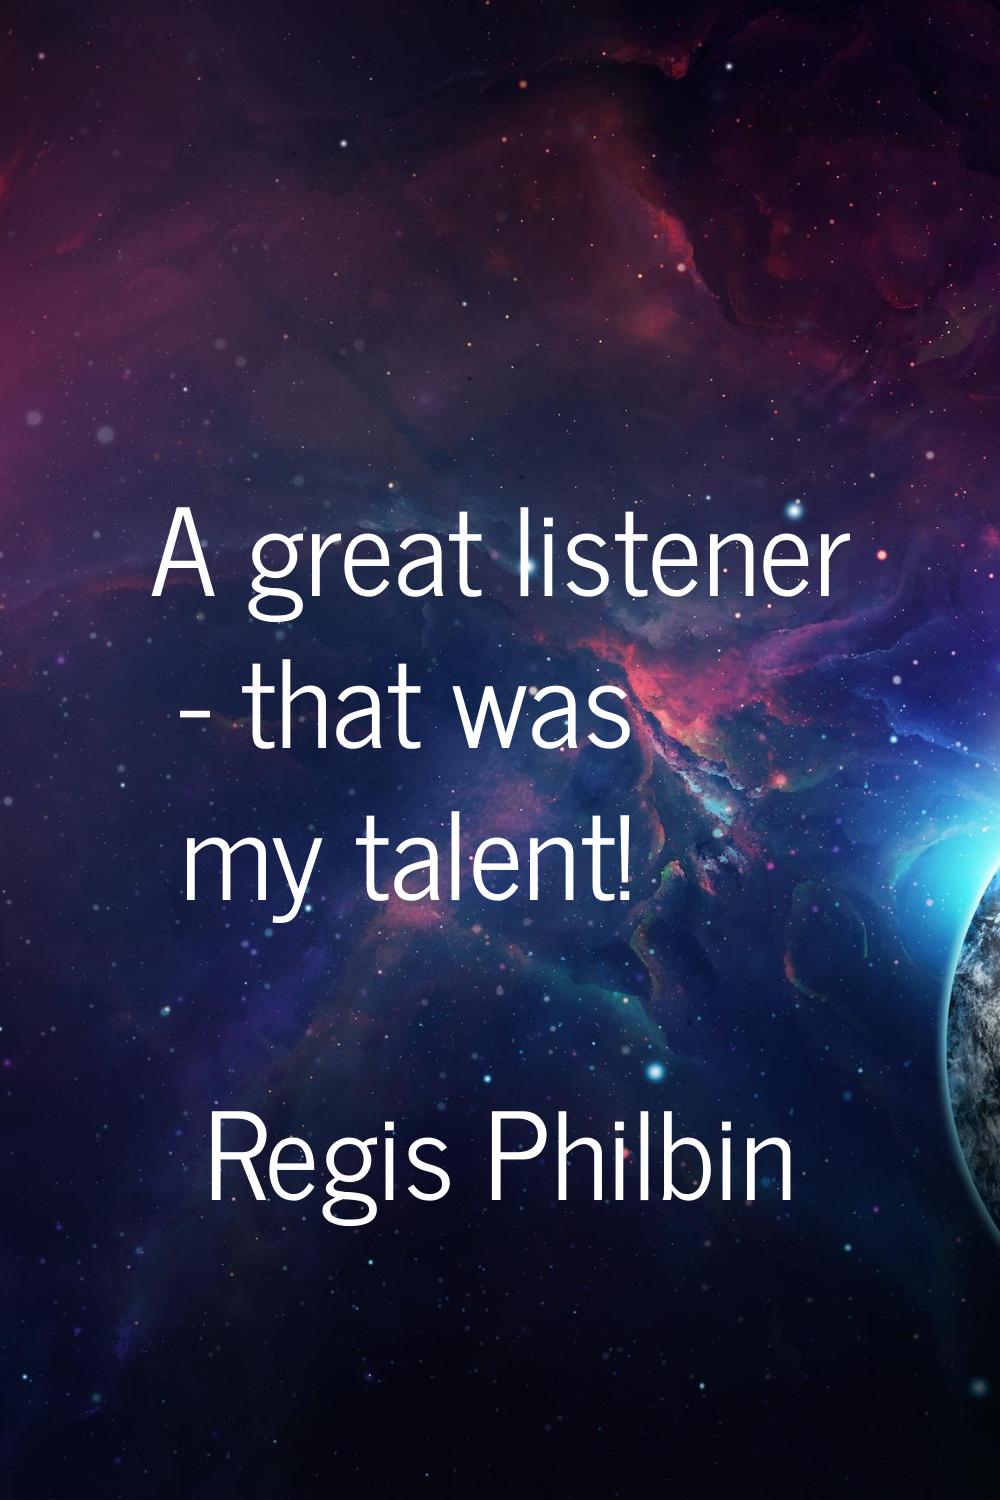 A great listener - that was my talent!